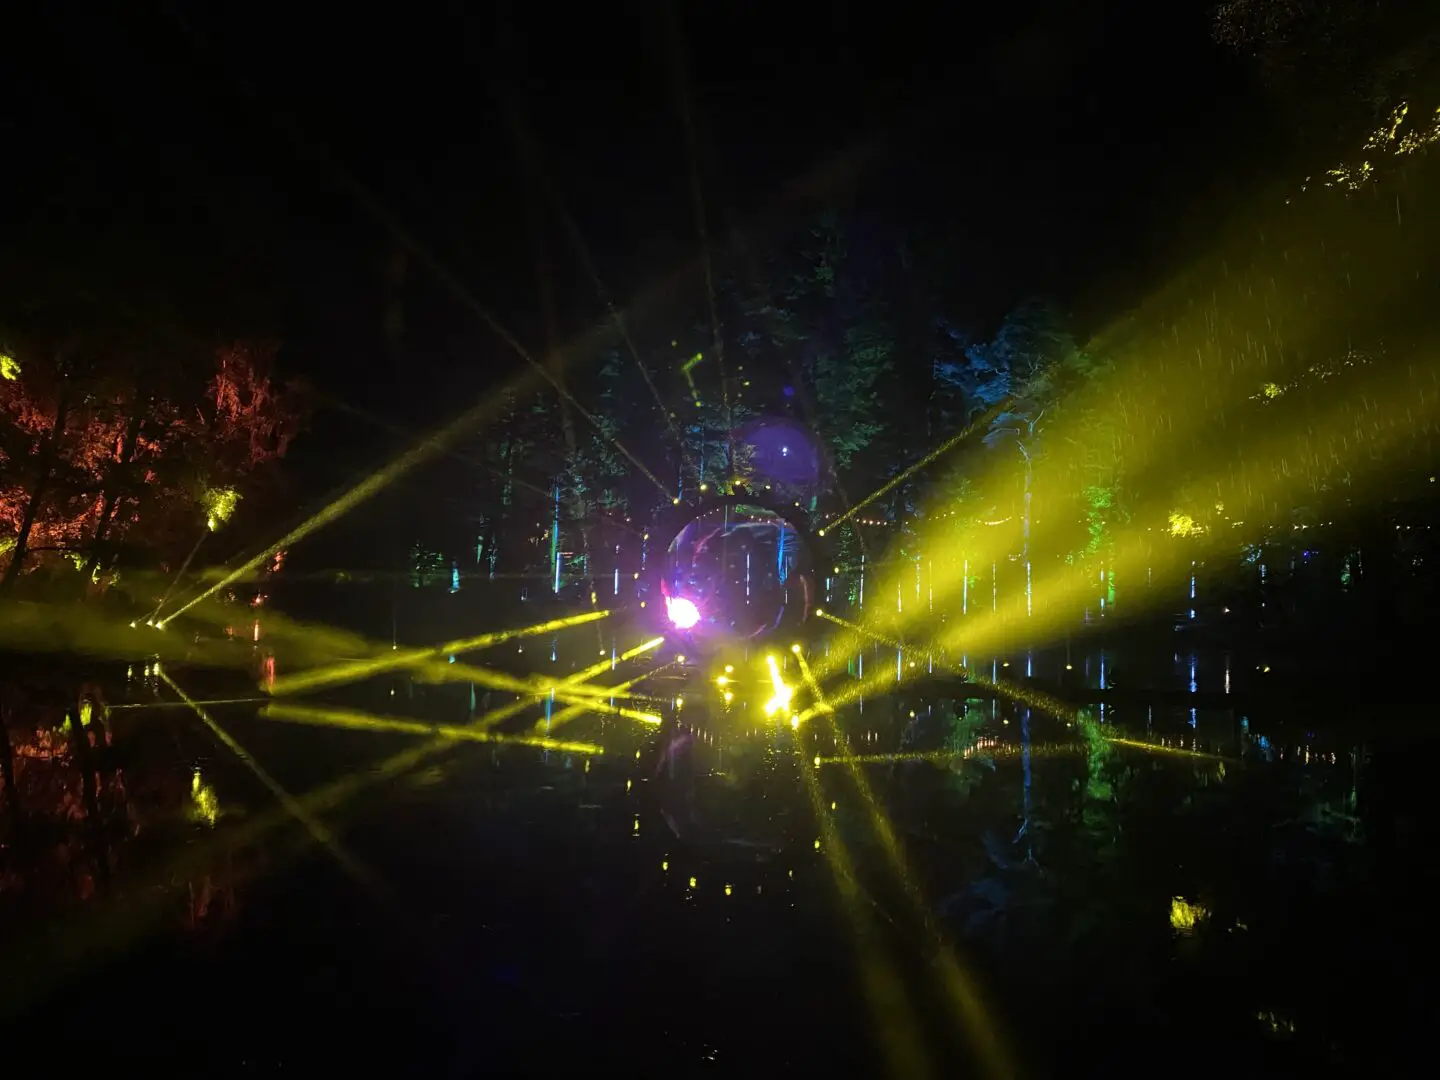 Light show in a forest